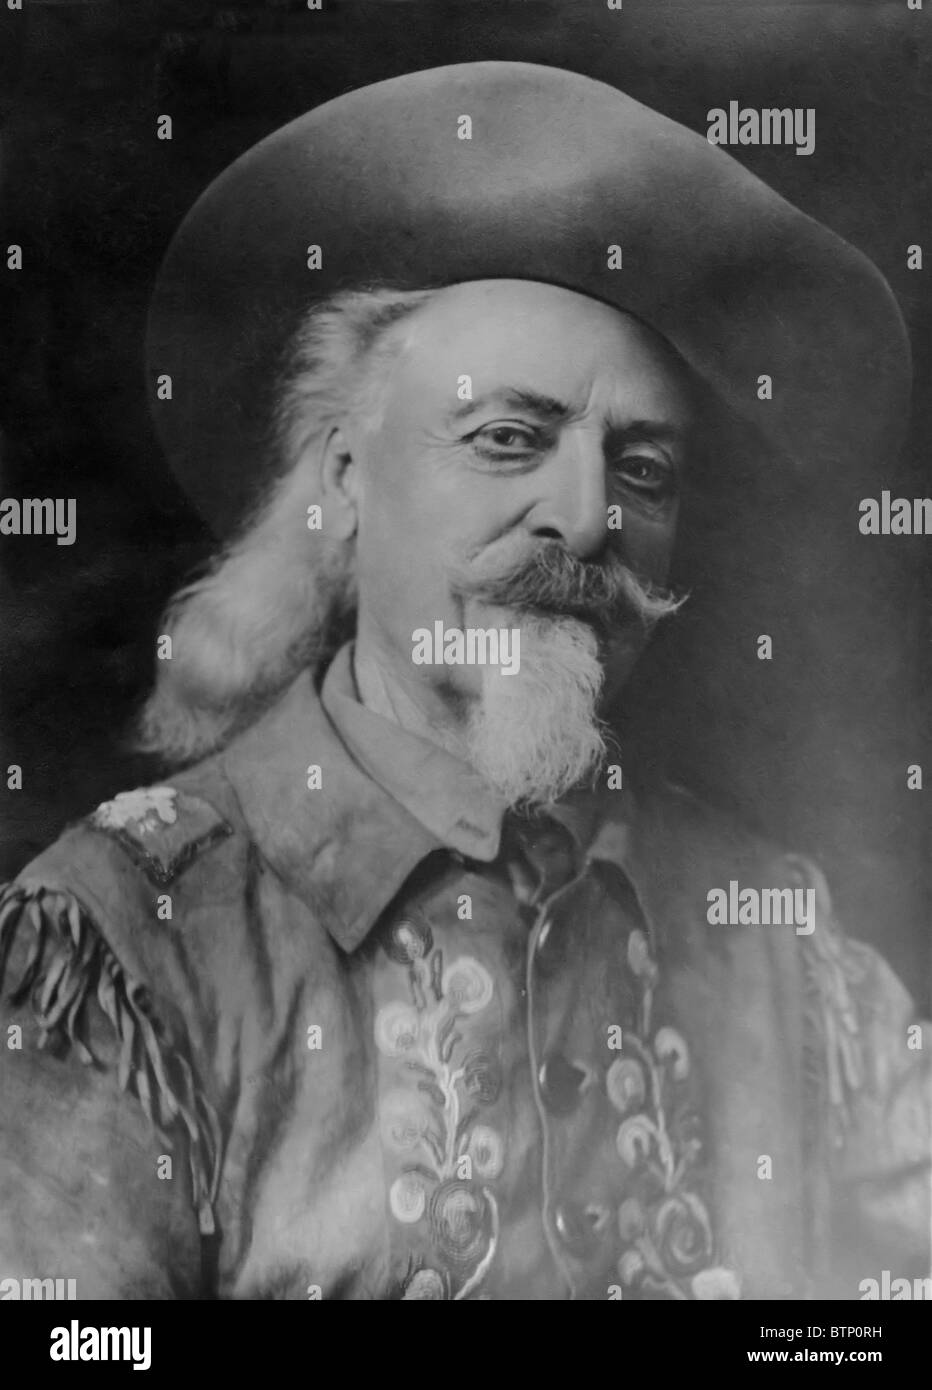 William Bill Cody also known as Buffalo Bill, which was made famous by his Wild West show. Stock Photo